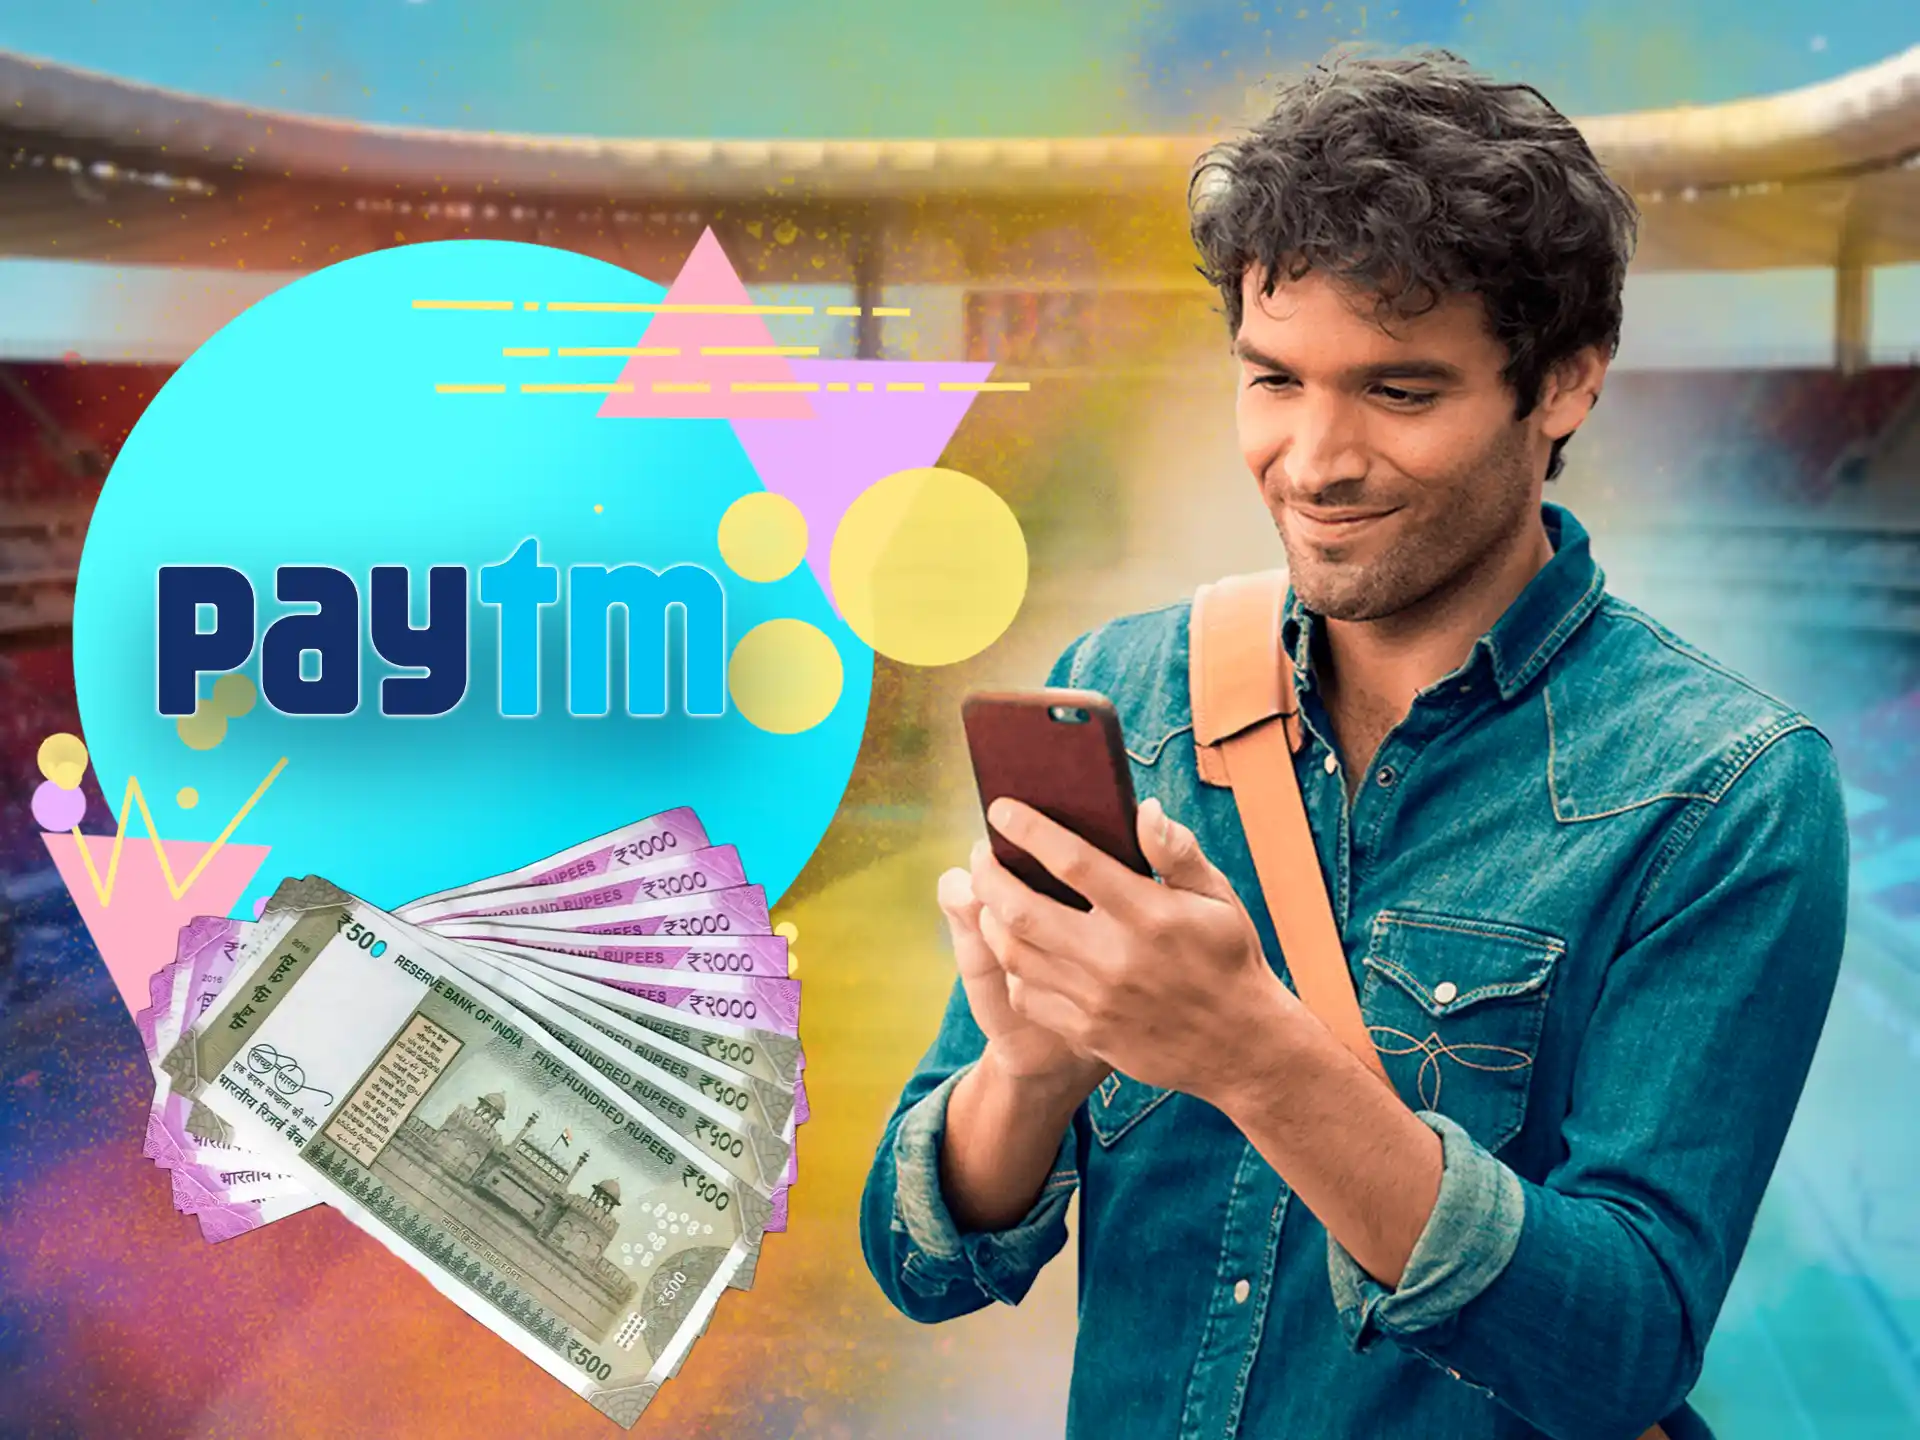 This is a leader of e-wallets in India, here you can easily get your winnings to your bank account.